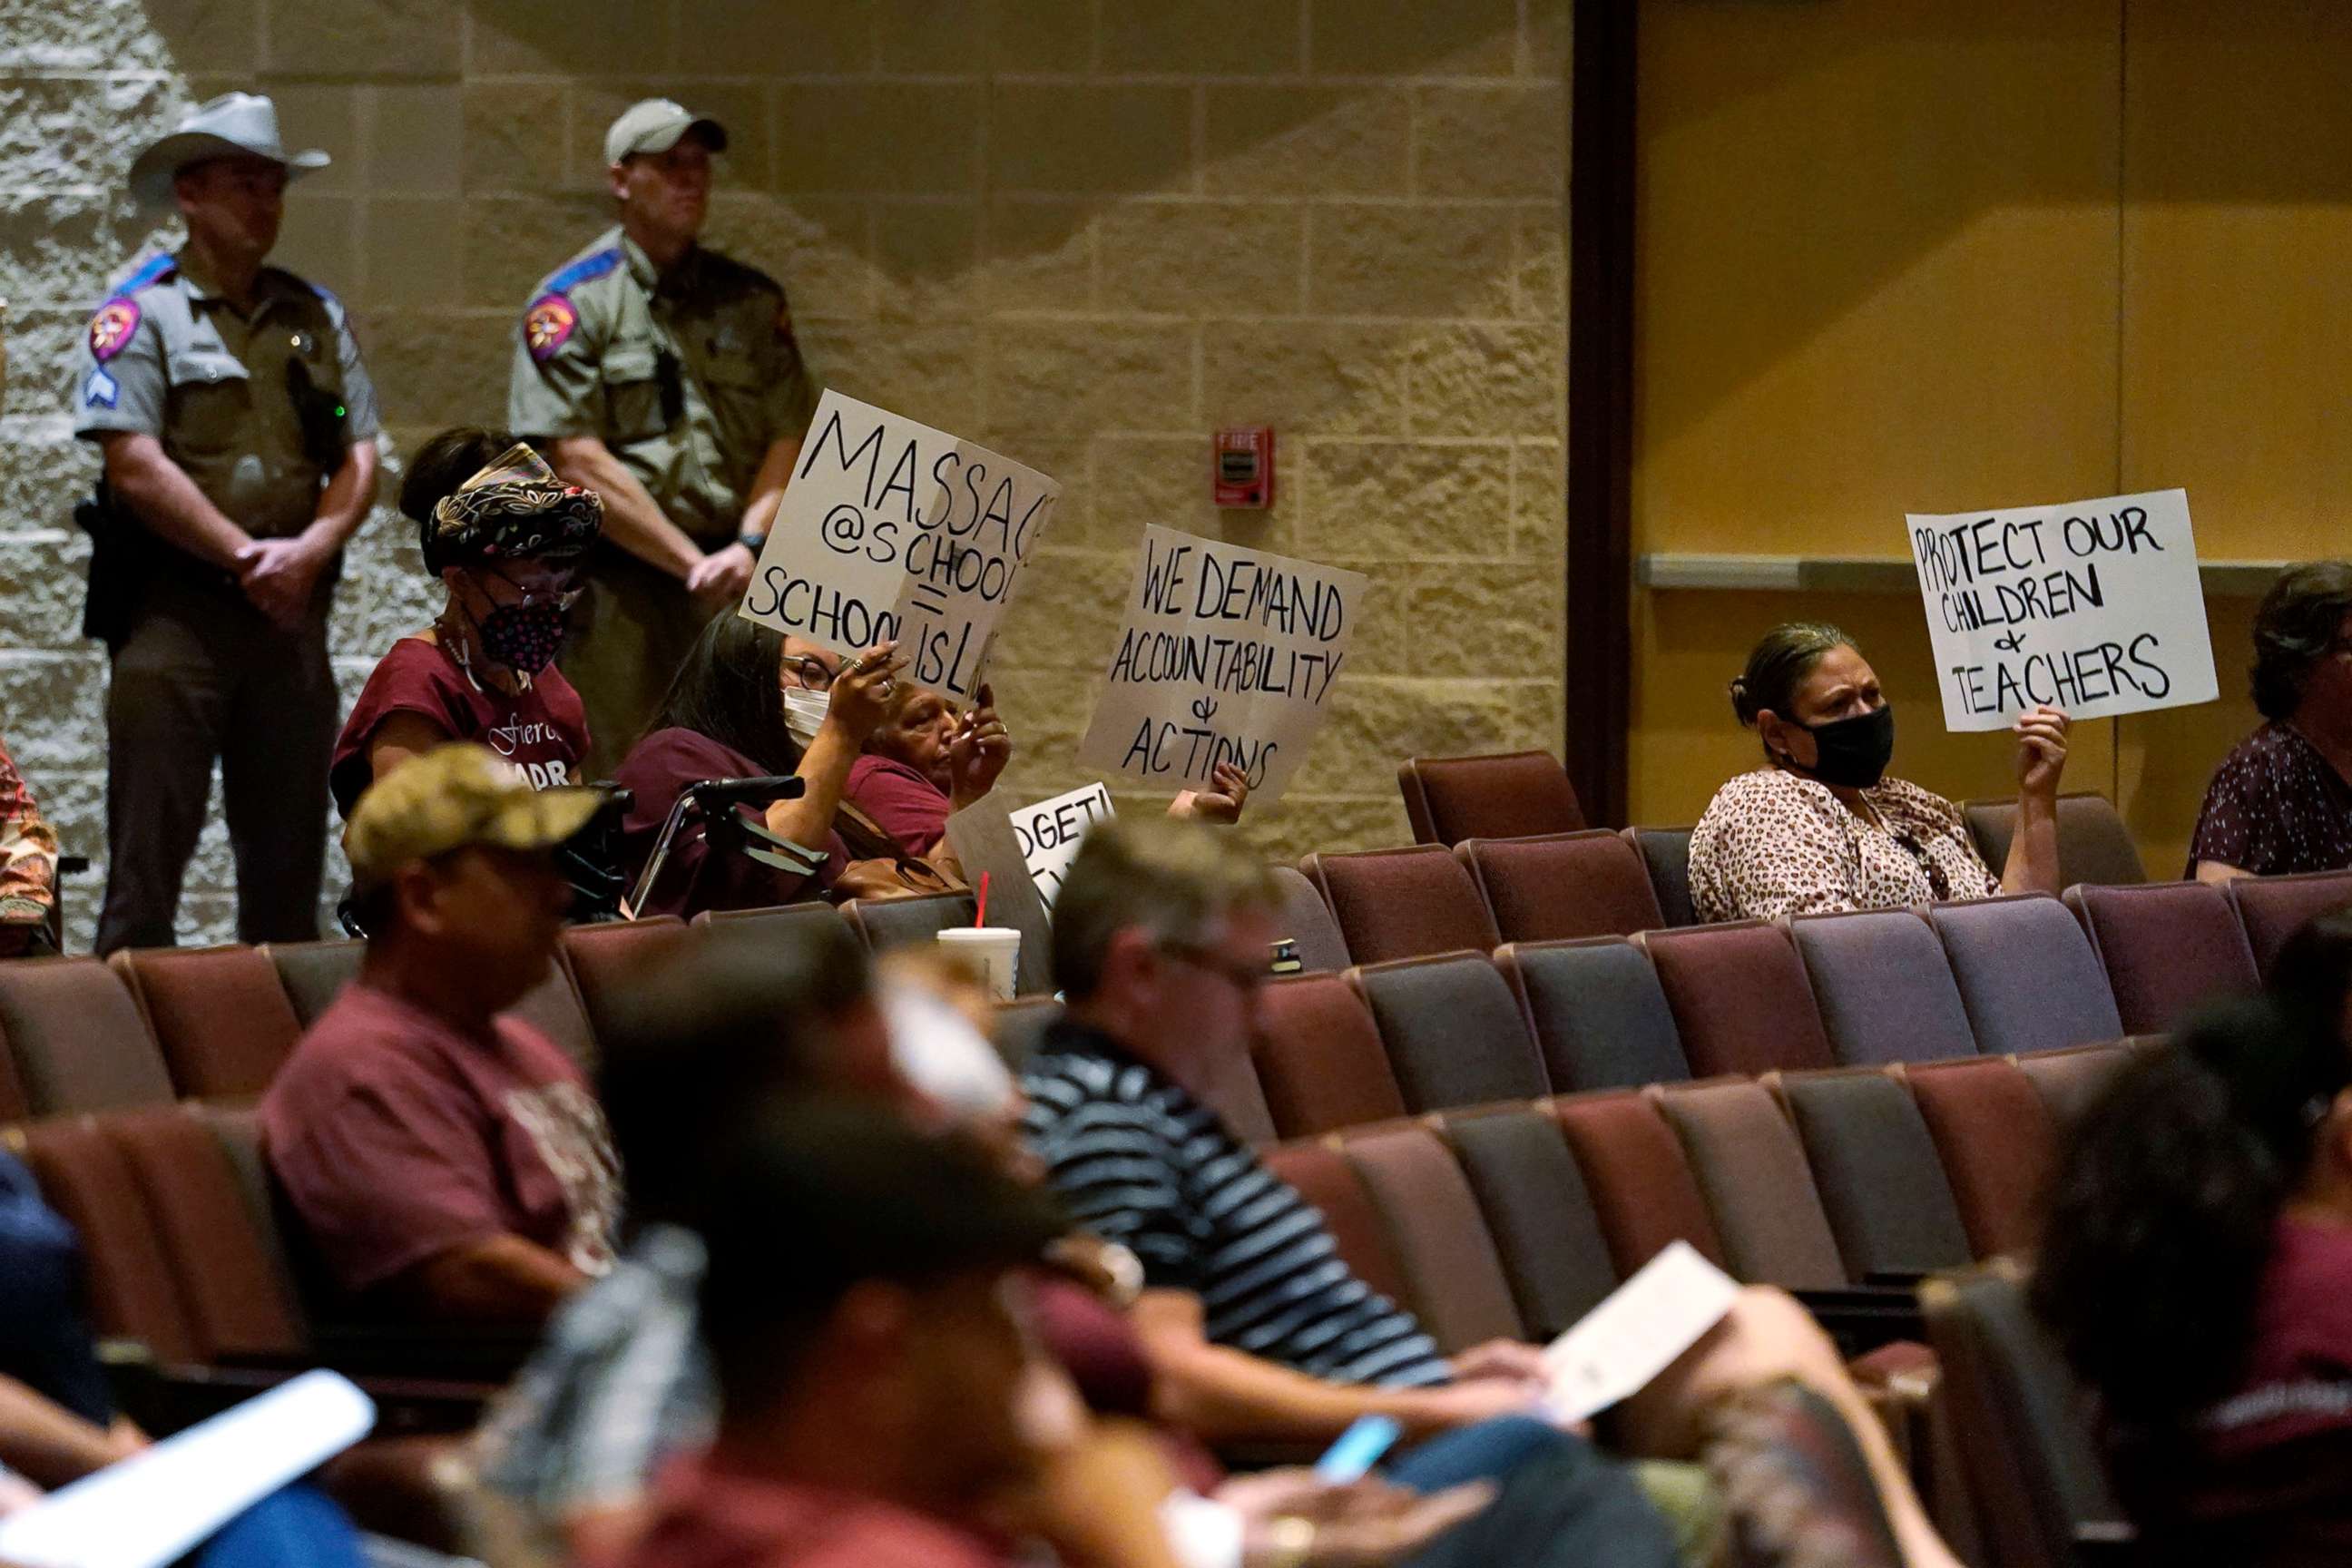 PHOTO: Parents and family hold protest signs during a special meeting of the Board of Trustees of Uvalde Consolidated Independent School District where parents addressed last month's shooting at Robb Elementary School, on July 18, 2022, in Uvalde, Texas.